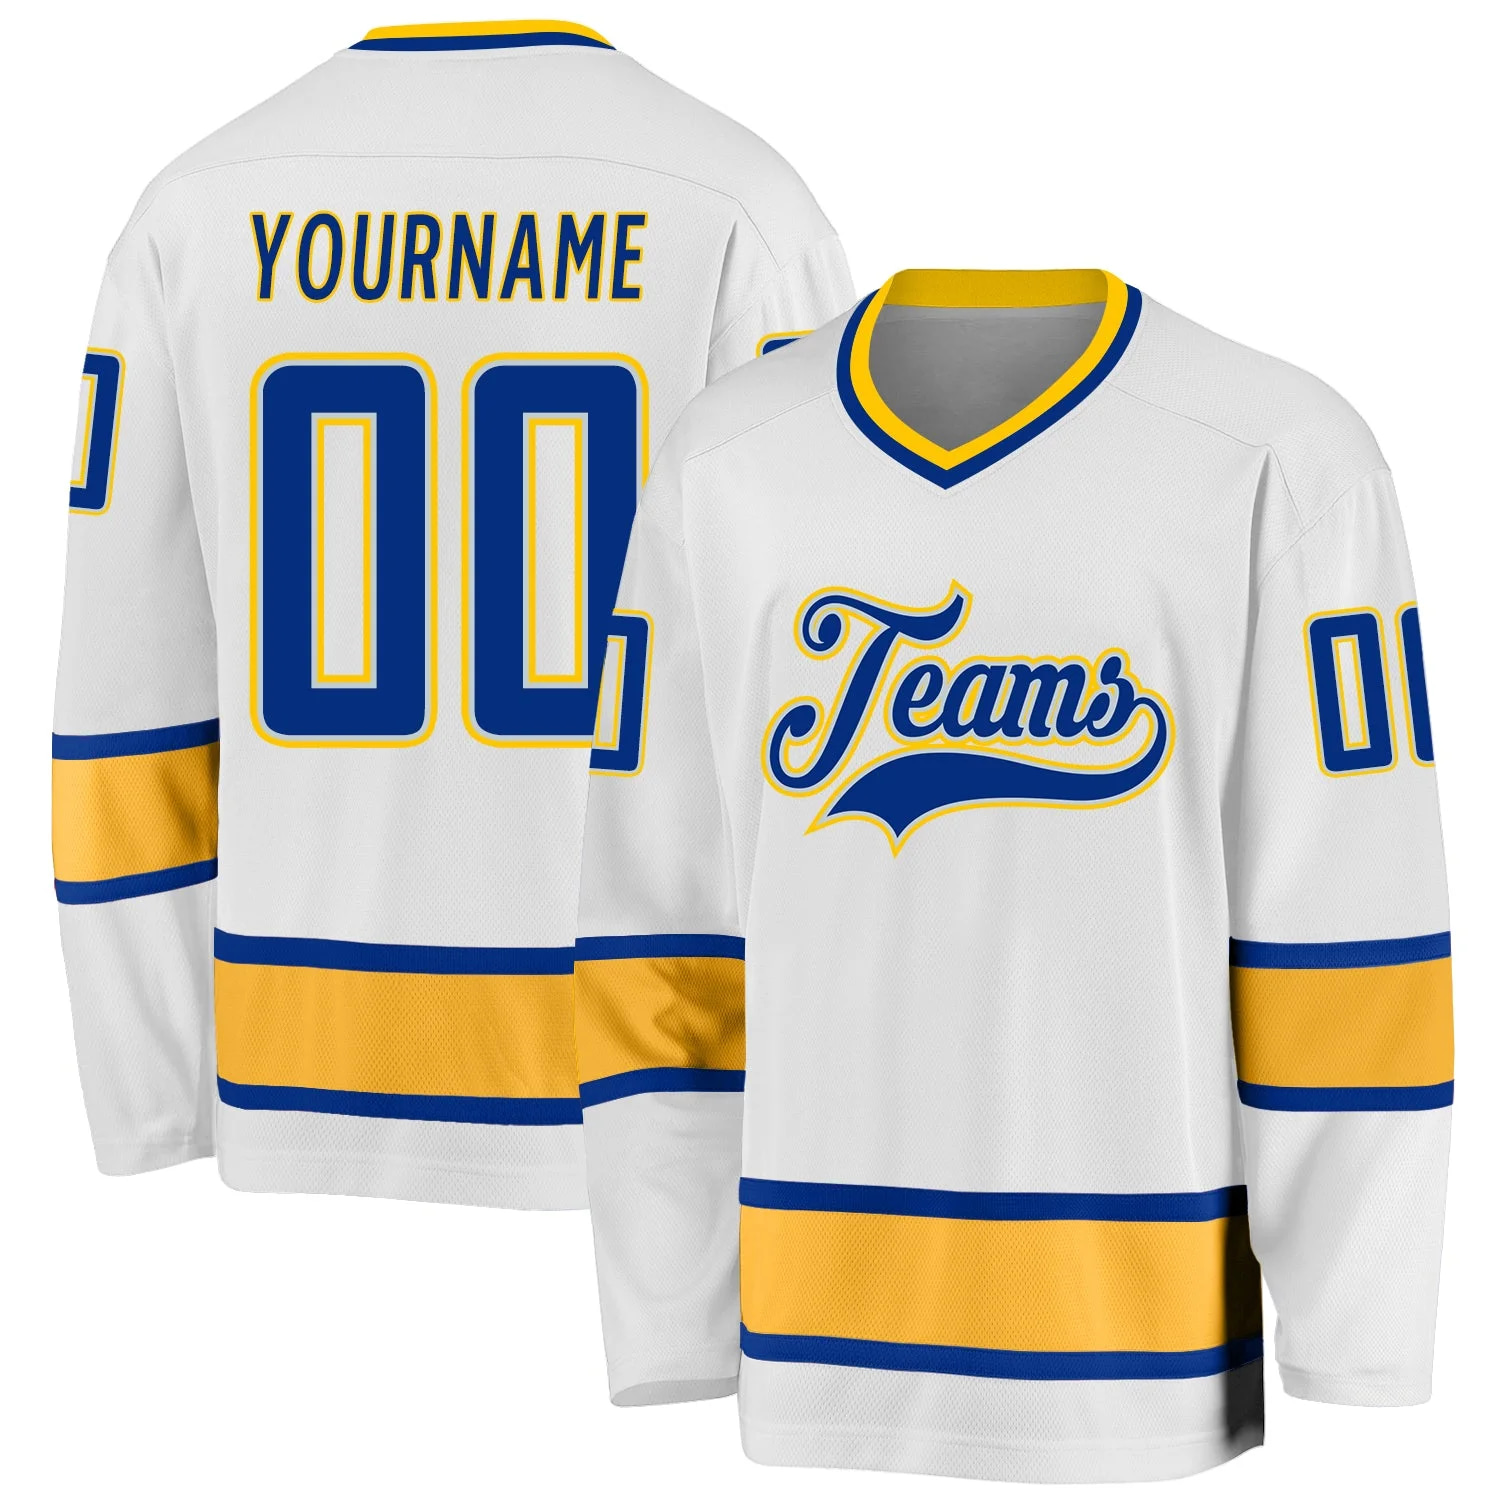 Stitched And Print White Royal-gold Hockey Jersey Custom